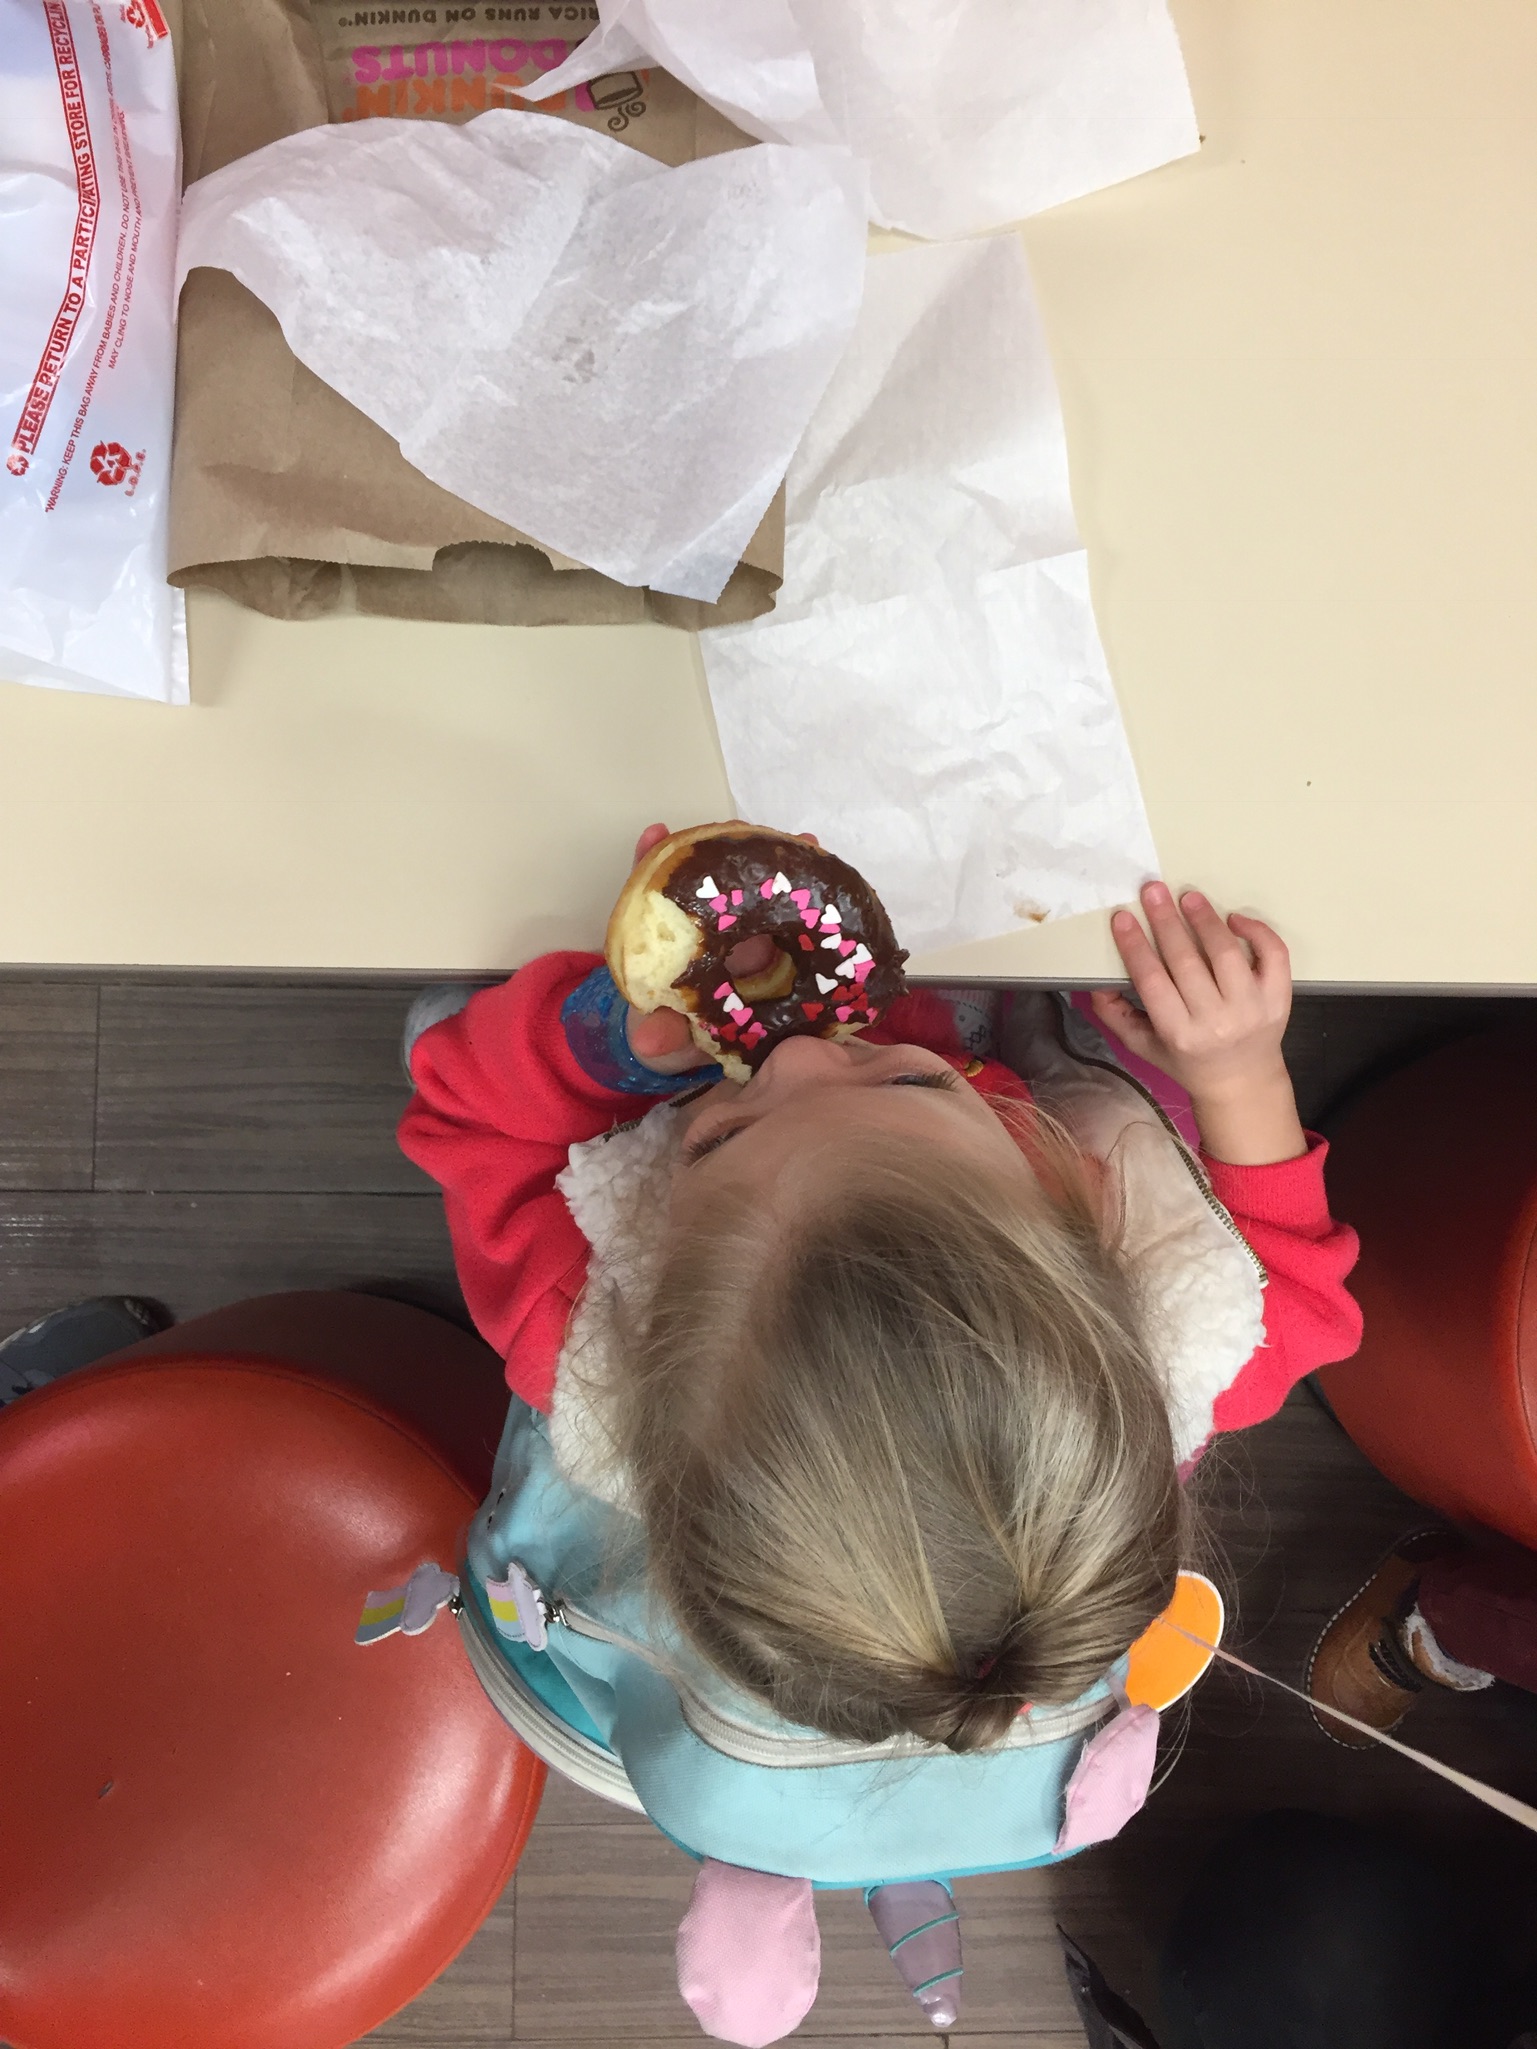  Donut with chocolate frosting and sprinkles, please! 